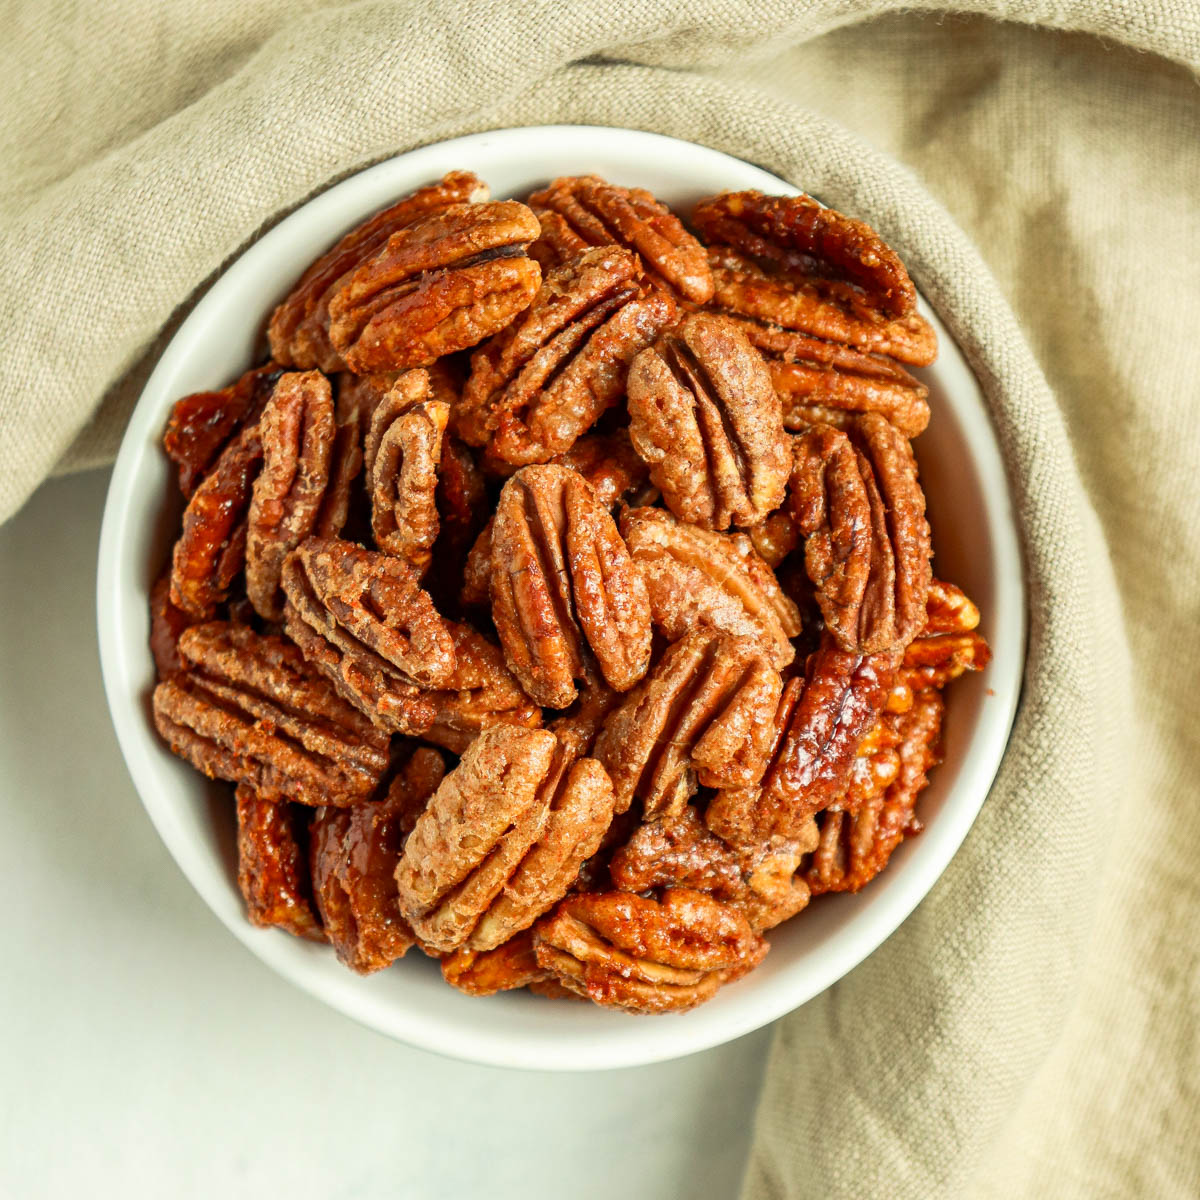 Bowl of candied pecans with a beige towel wrapped around it.